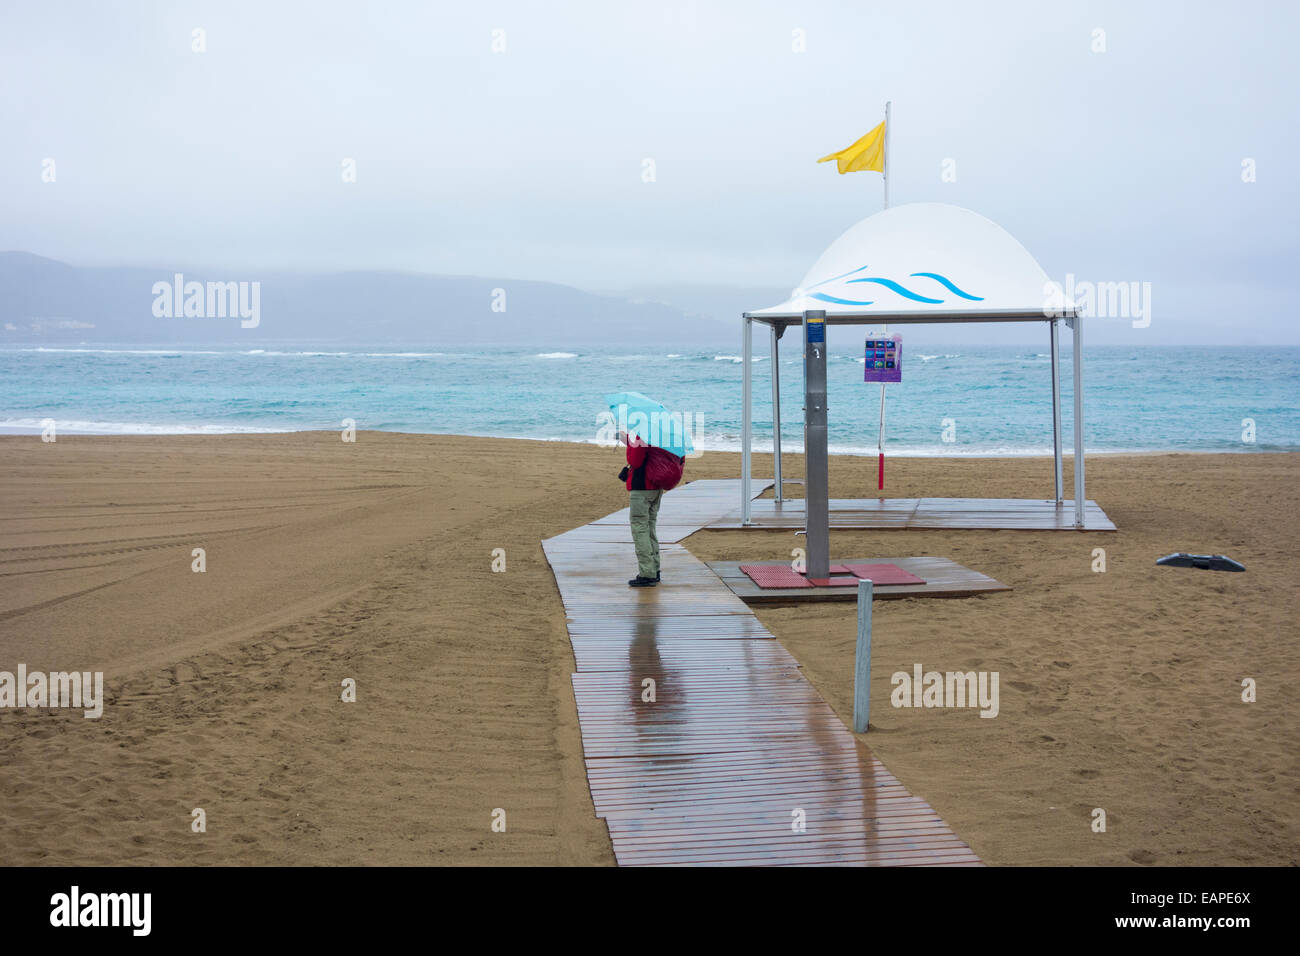 Las Palmas, Gran Canaria, Canary Islands, Spain. 19th November, 2014.  Weather: Lone tourist on the usually packed Las Canteras beach in Las Palmas,  the capital of Gran Canaria, as heavy rain sweeps